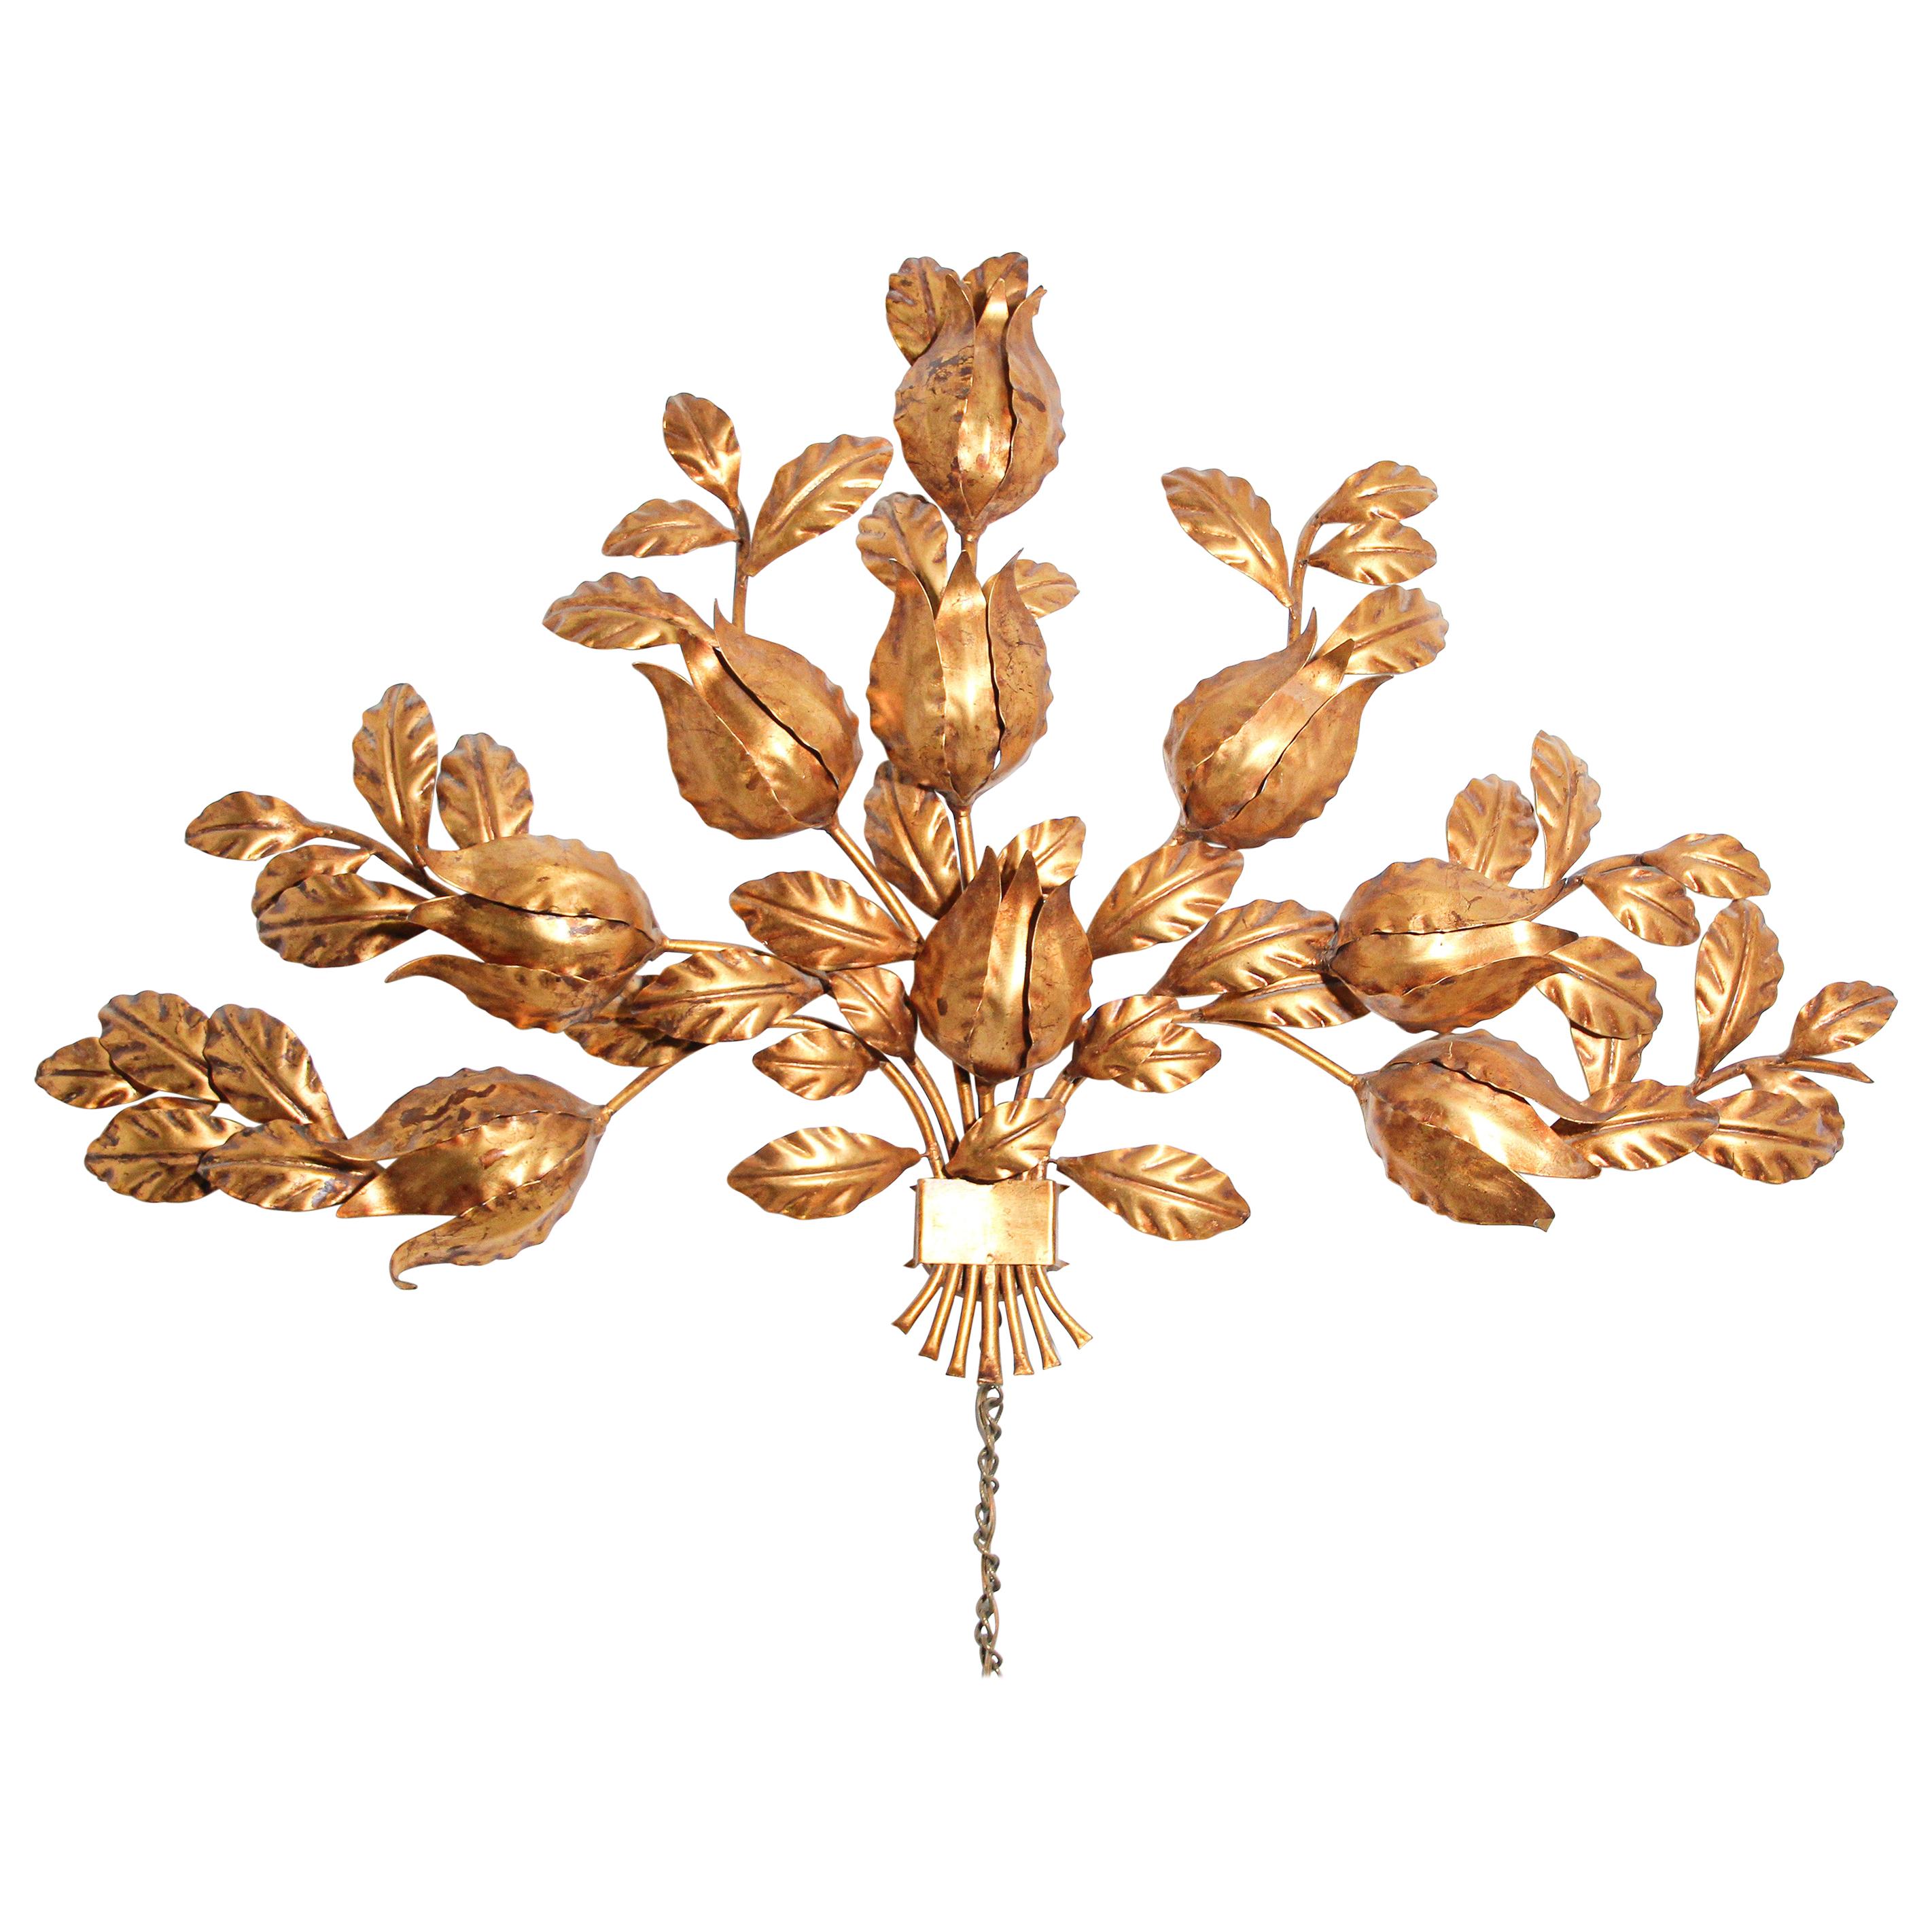 Hollywood Regency Gilt Metal Wall Sconce, by S. Salvadori, Italy, 1950s